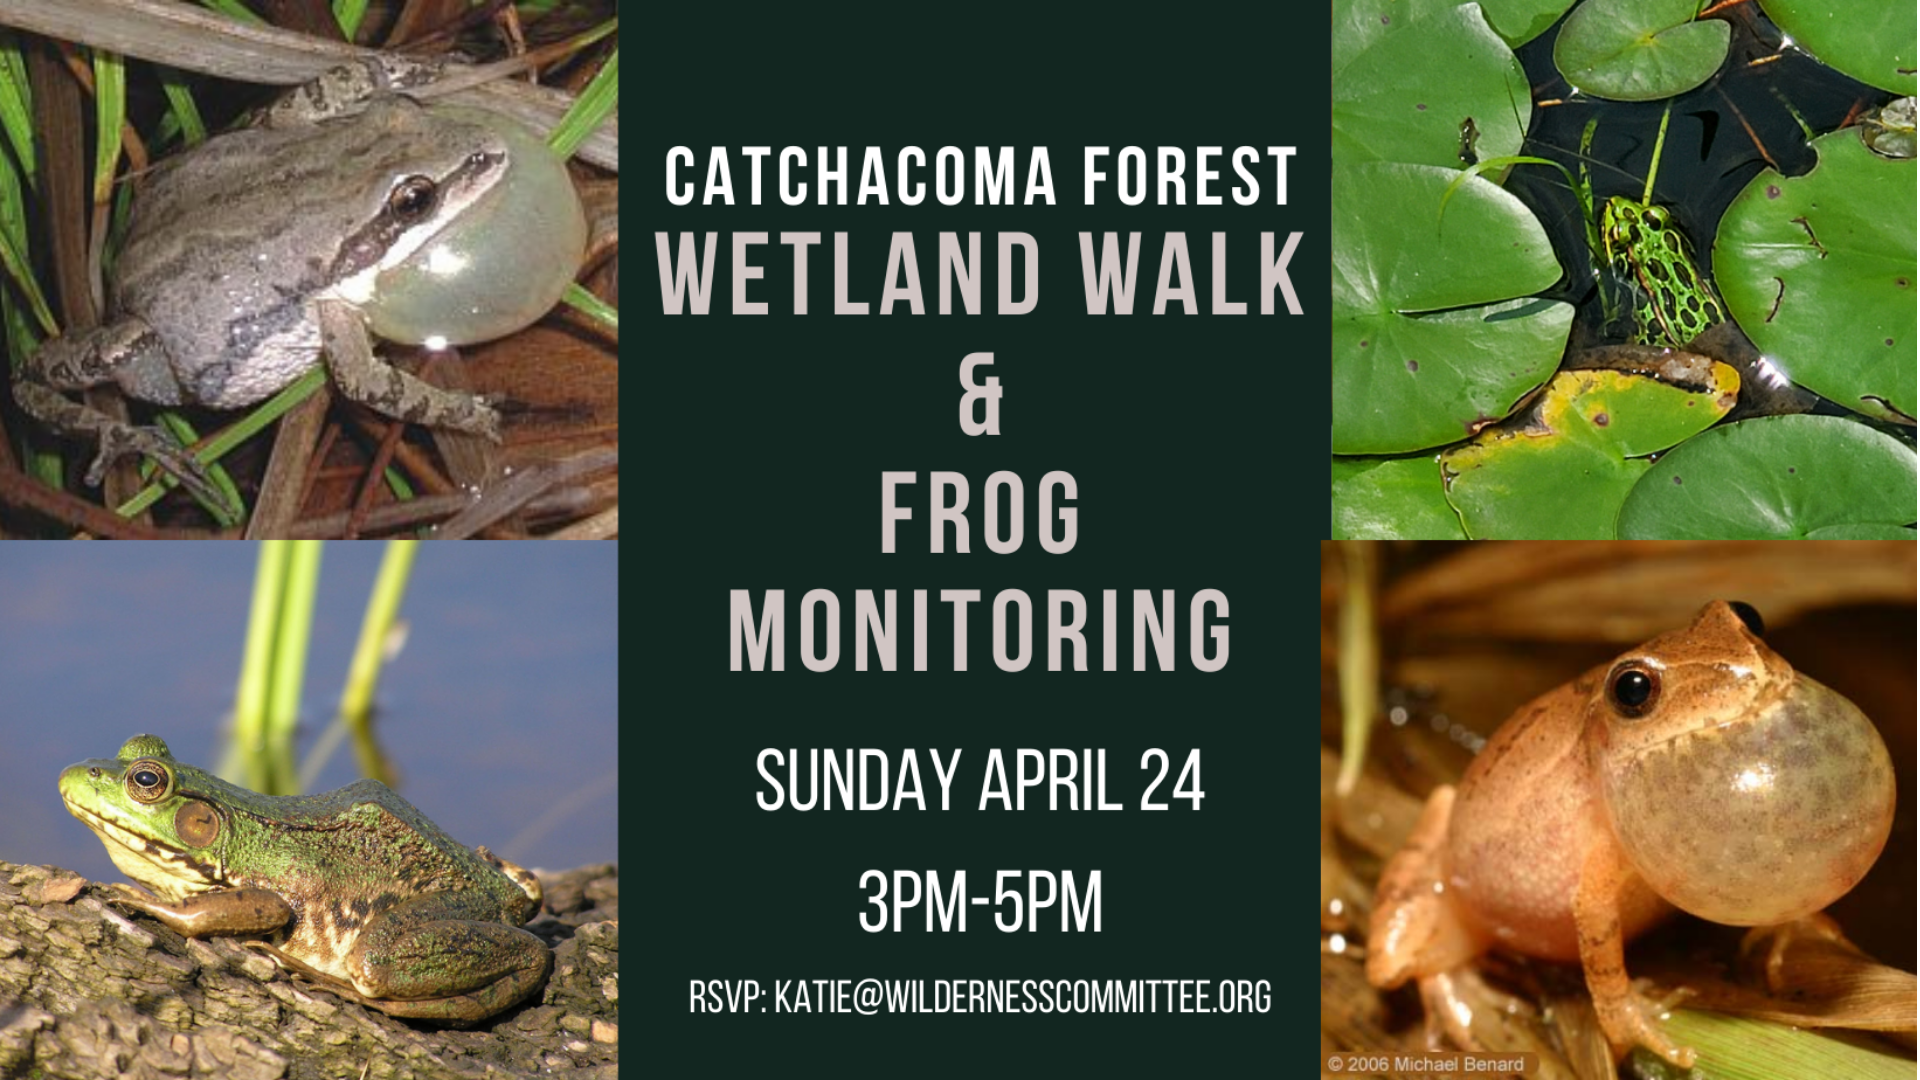 An event poster with photos of four different types of frogs. The text of the image reads "Catchacoma Forest Wetland Walk and Frog Monitoring. Sunday April 24. 3 p.m. to 5 p.m. RSVP: Katie@wildernesscommittee.org." End of image description.